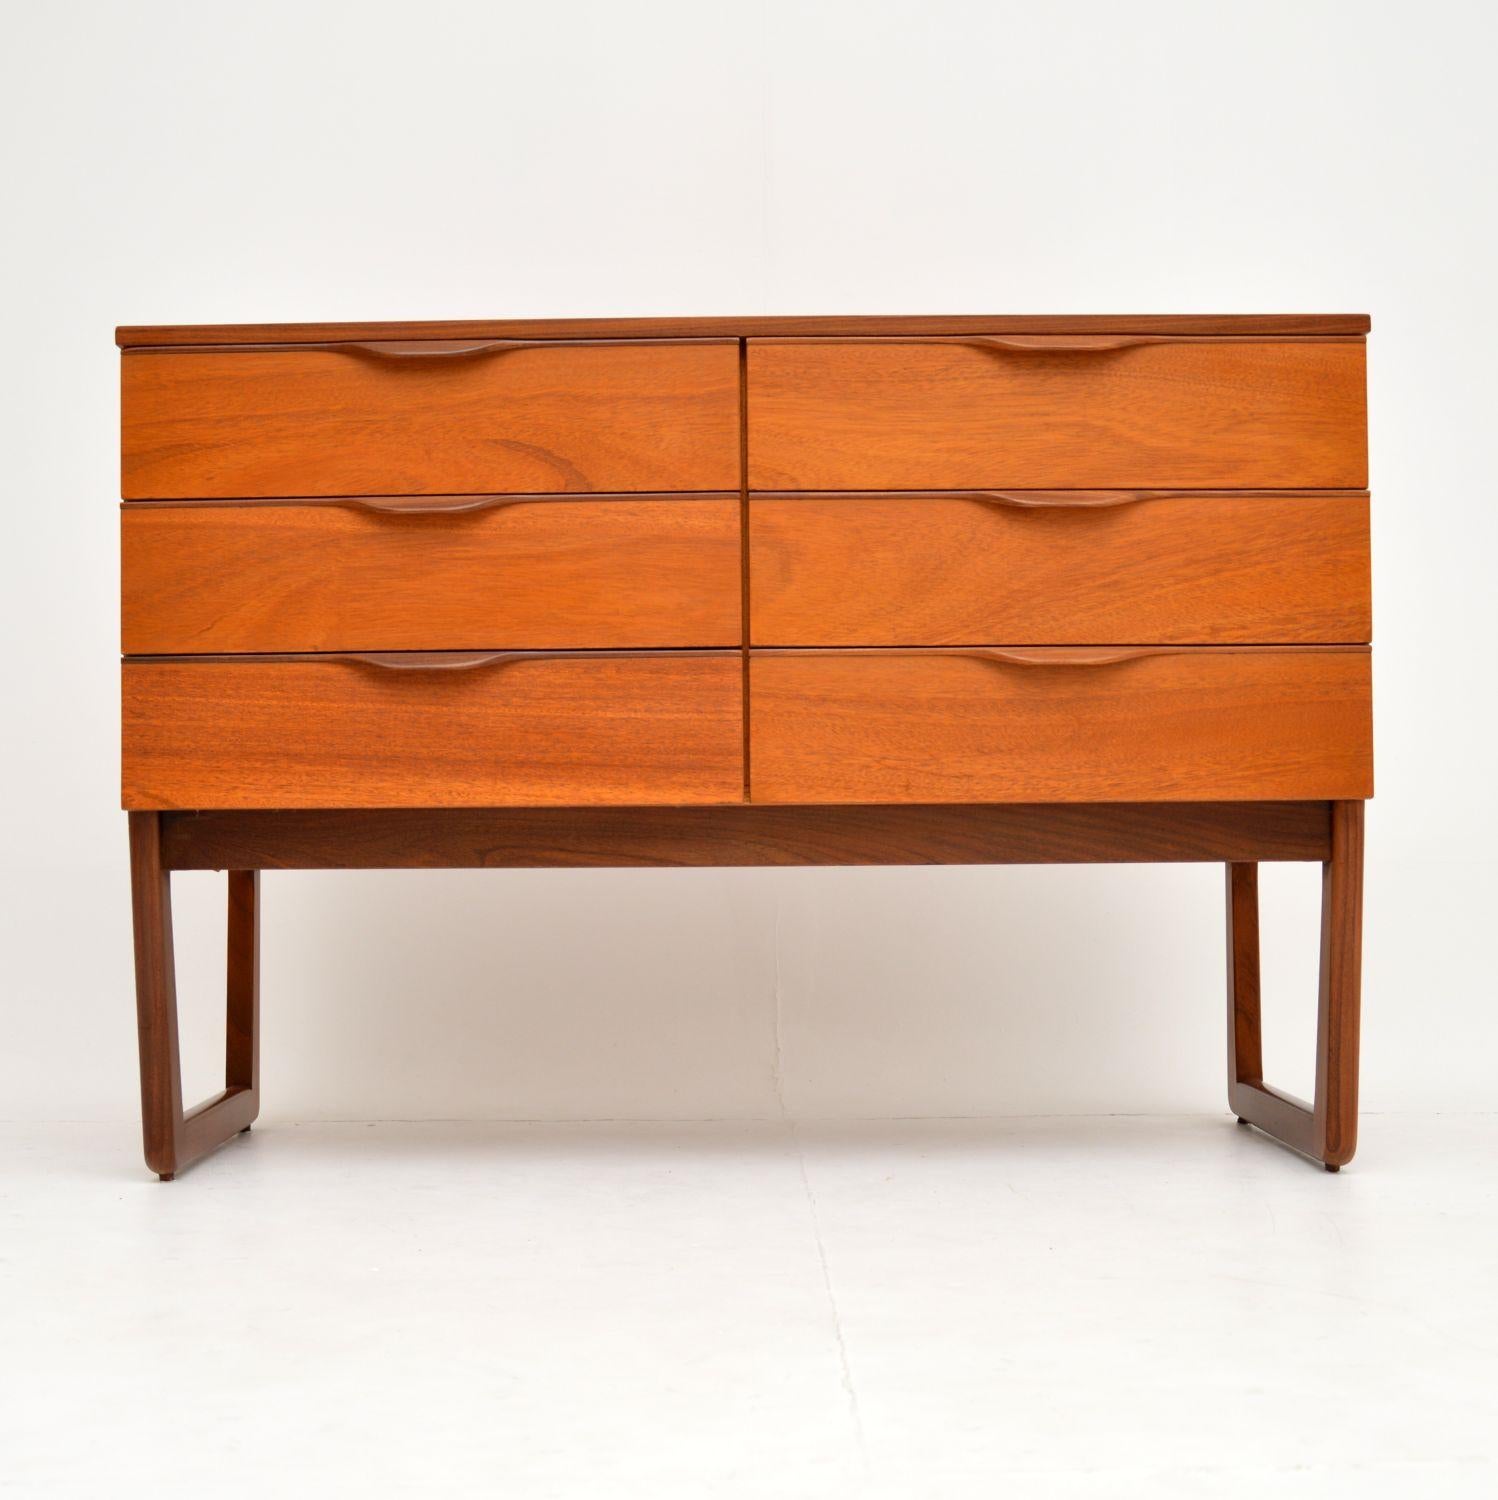 A stylish and useful vintage chest on legs in mahogany, this dates from the 1960s. It has a sleek and elegant design, we have had this stripped and re-polished to a very high standard; the condition is superb throughout. The legs can be removed for